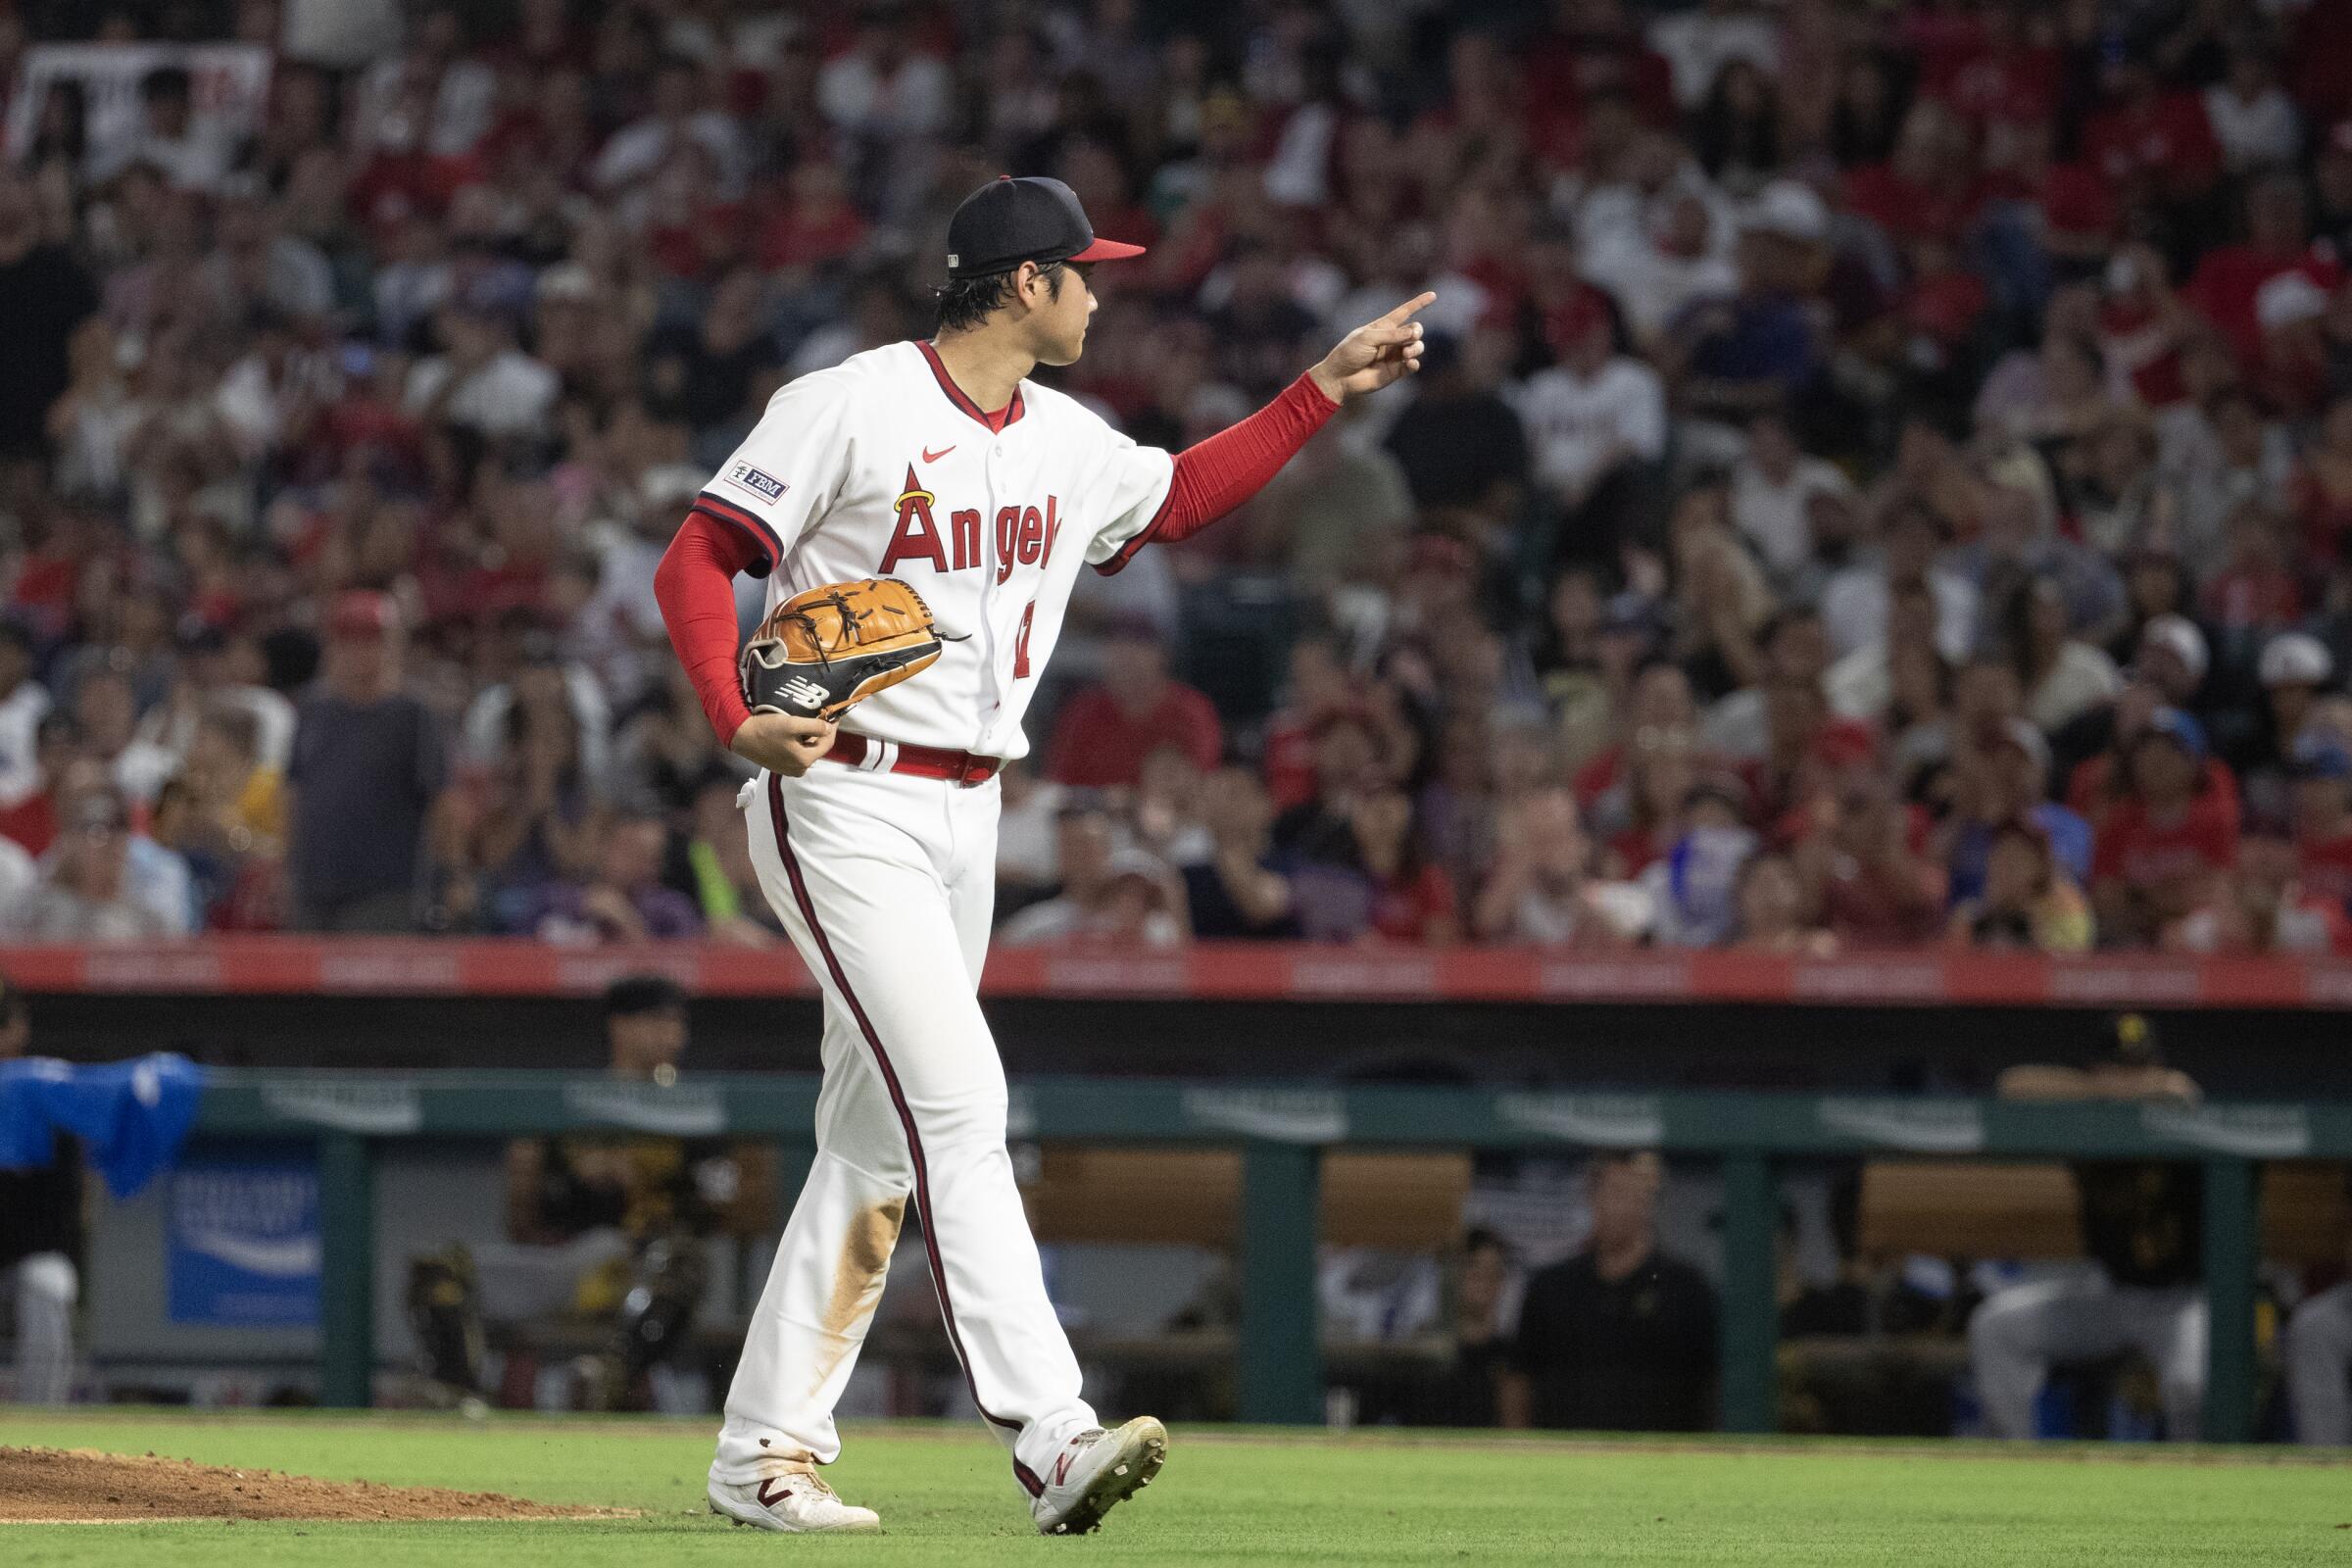 Angels star Shohei Ohtani points to the crowd as he leaves the mound during a game in July.